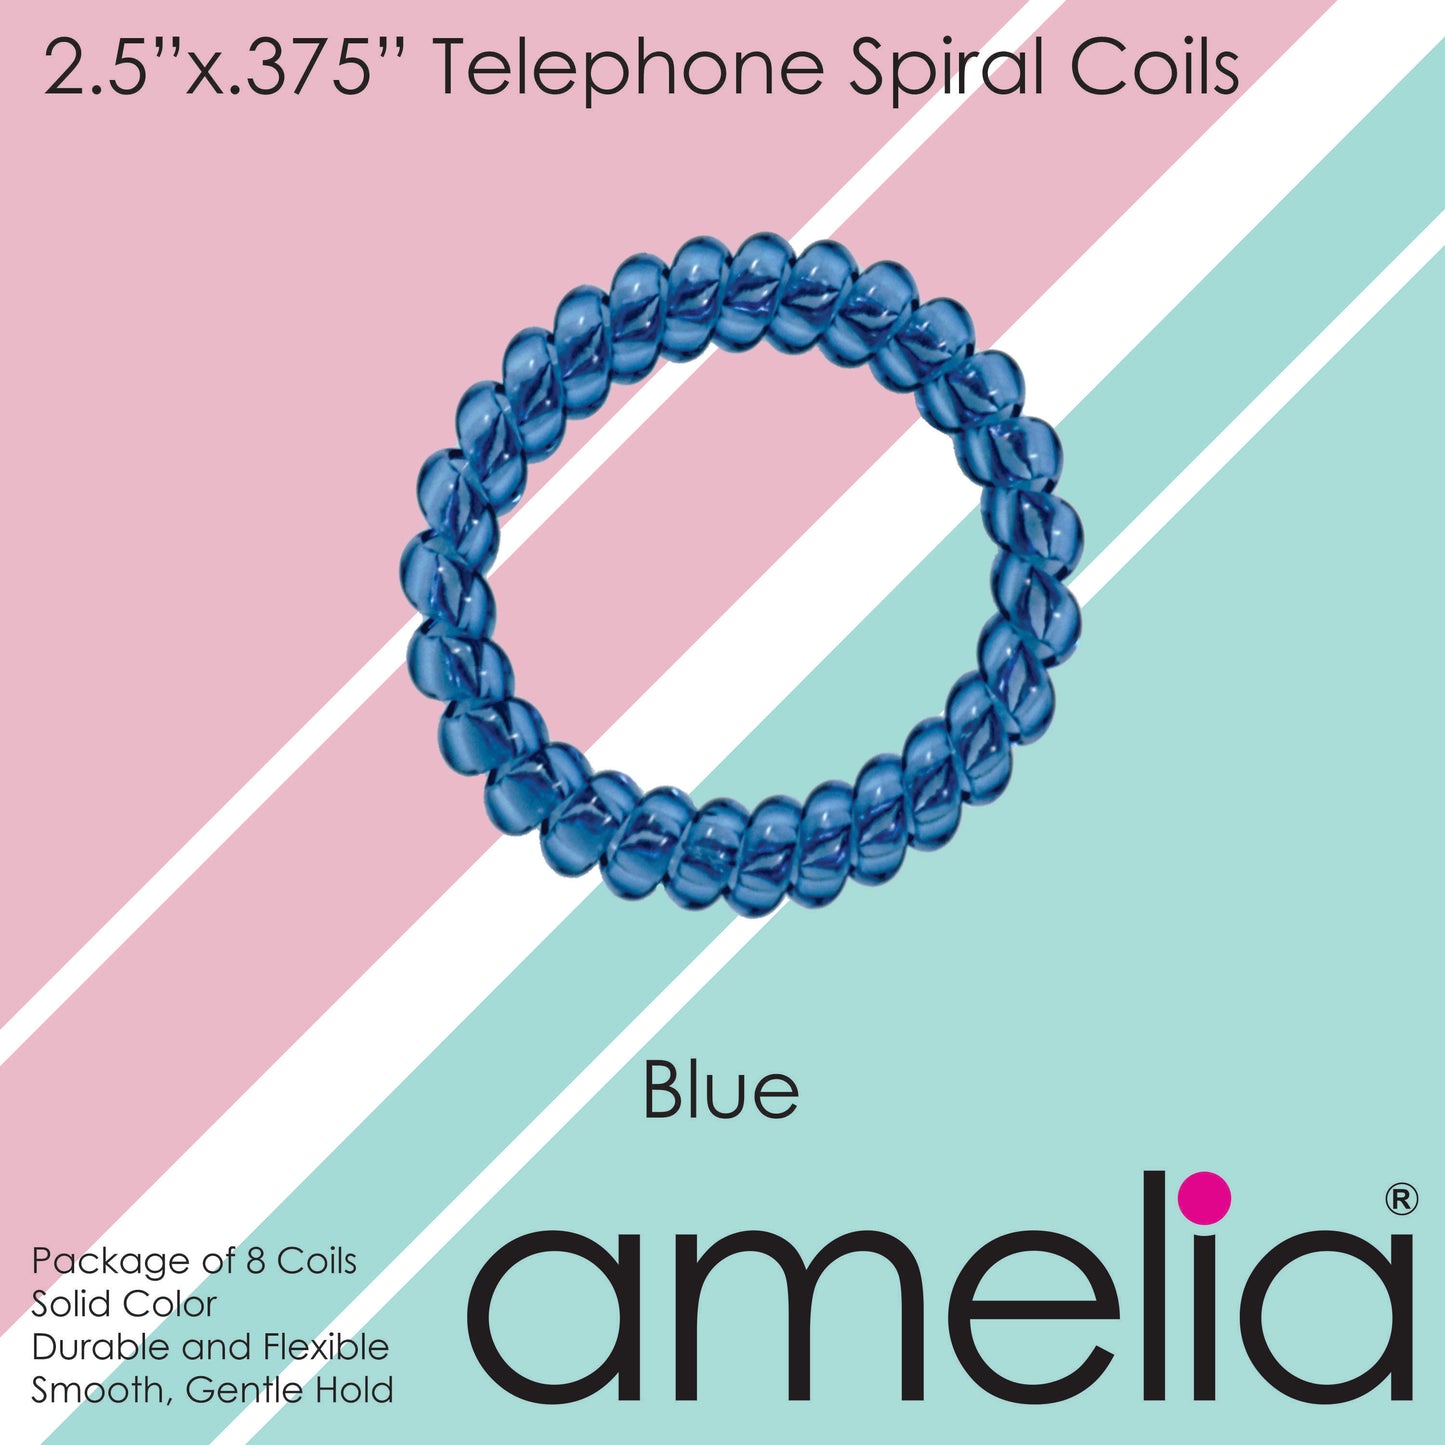 Amelia Beauty Products 8 Large Smooth Elastic Hair Coils, 2. 5in Diameter Thick Spiral Hair Ties, Gentle on Hair, Strong Hold and Minimizes Dents and Creases, Blue